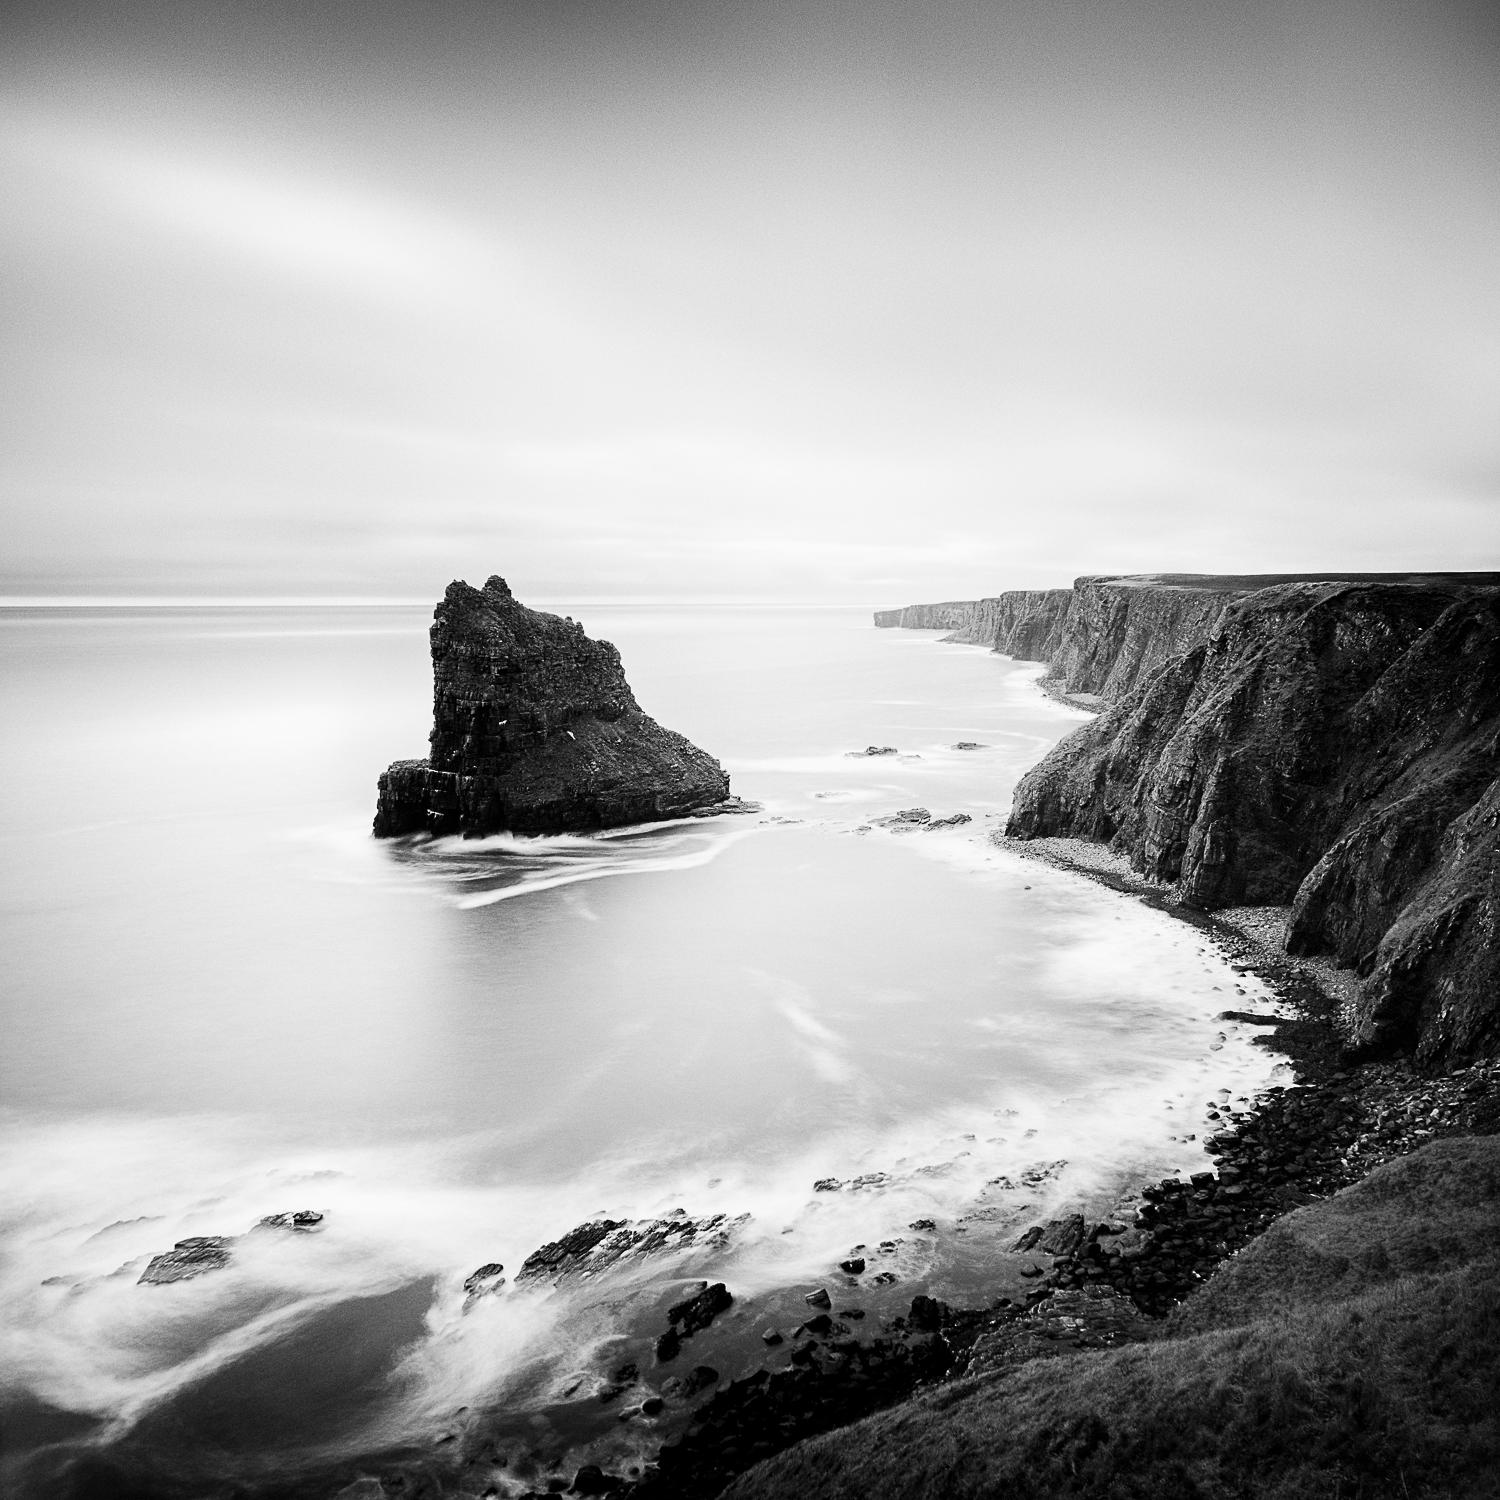 Surreal Moment, Cliffs, Rocks, Scotland, black white fineart photography, framed - Photograph by Gerald Berghammer